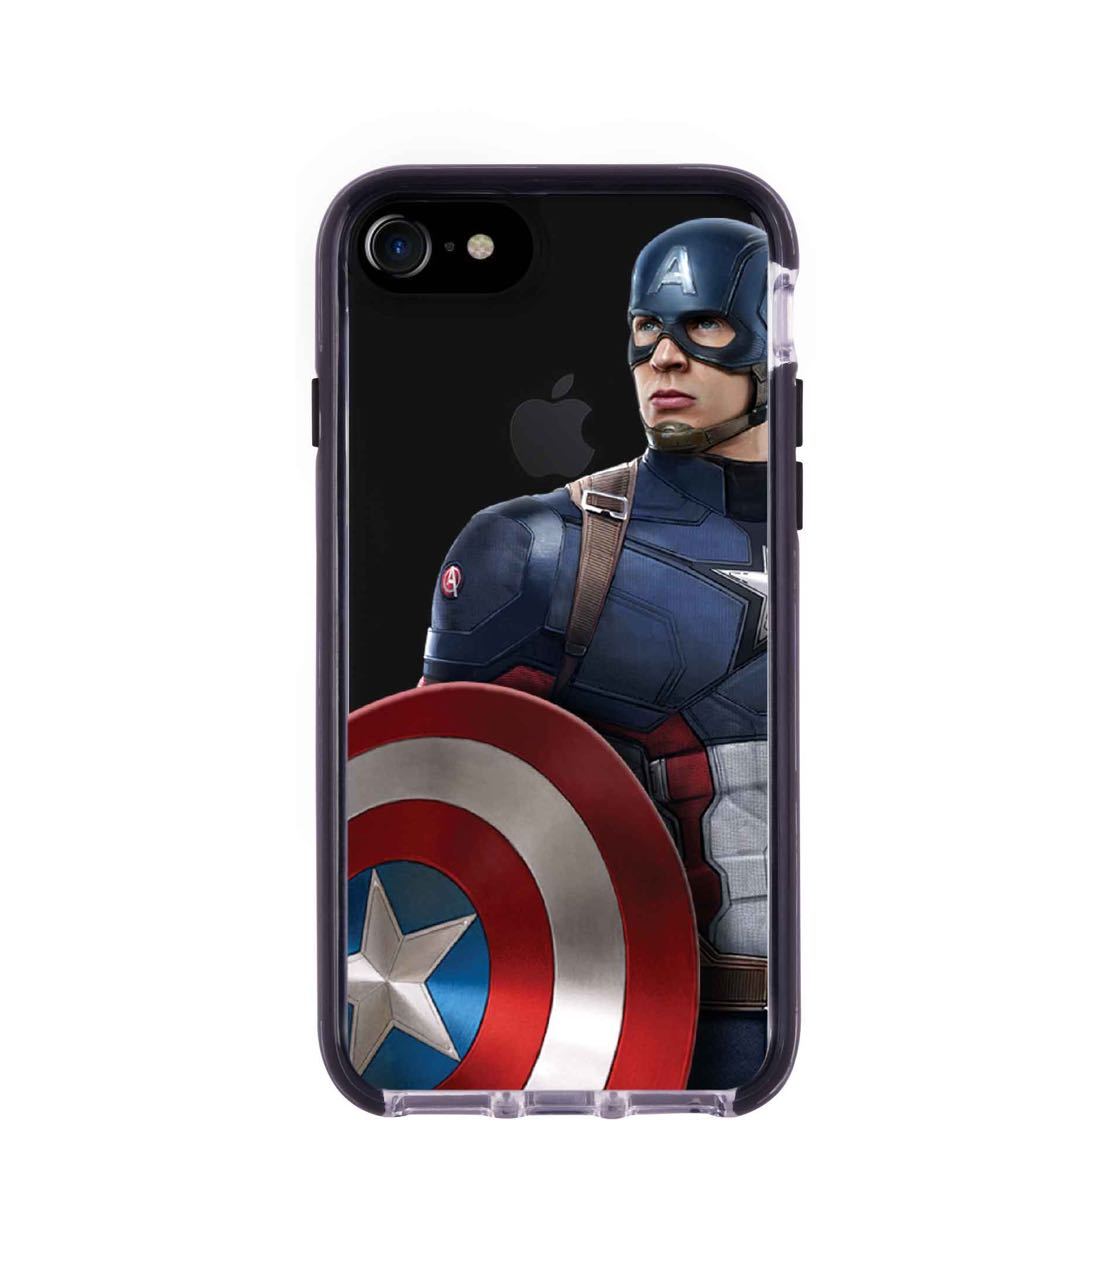 Team Blue Captain - Extreme Phone Case for iPhone 7